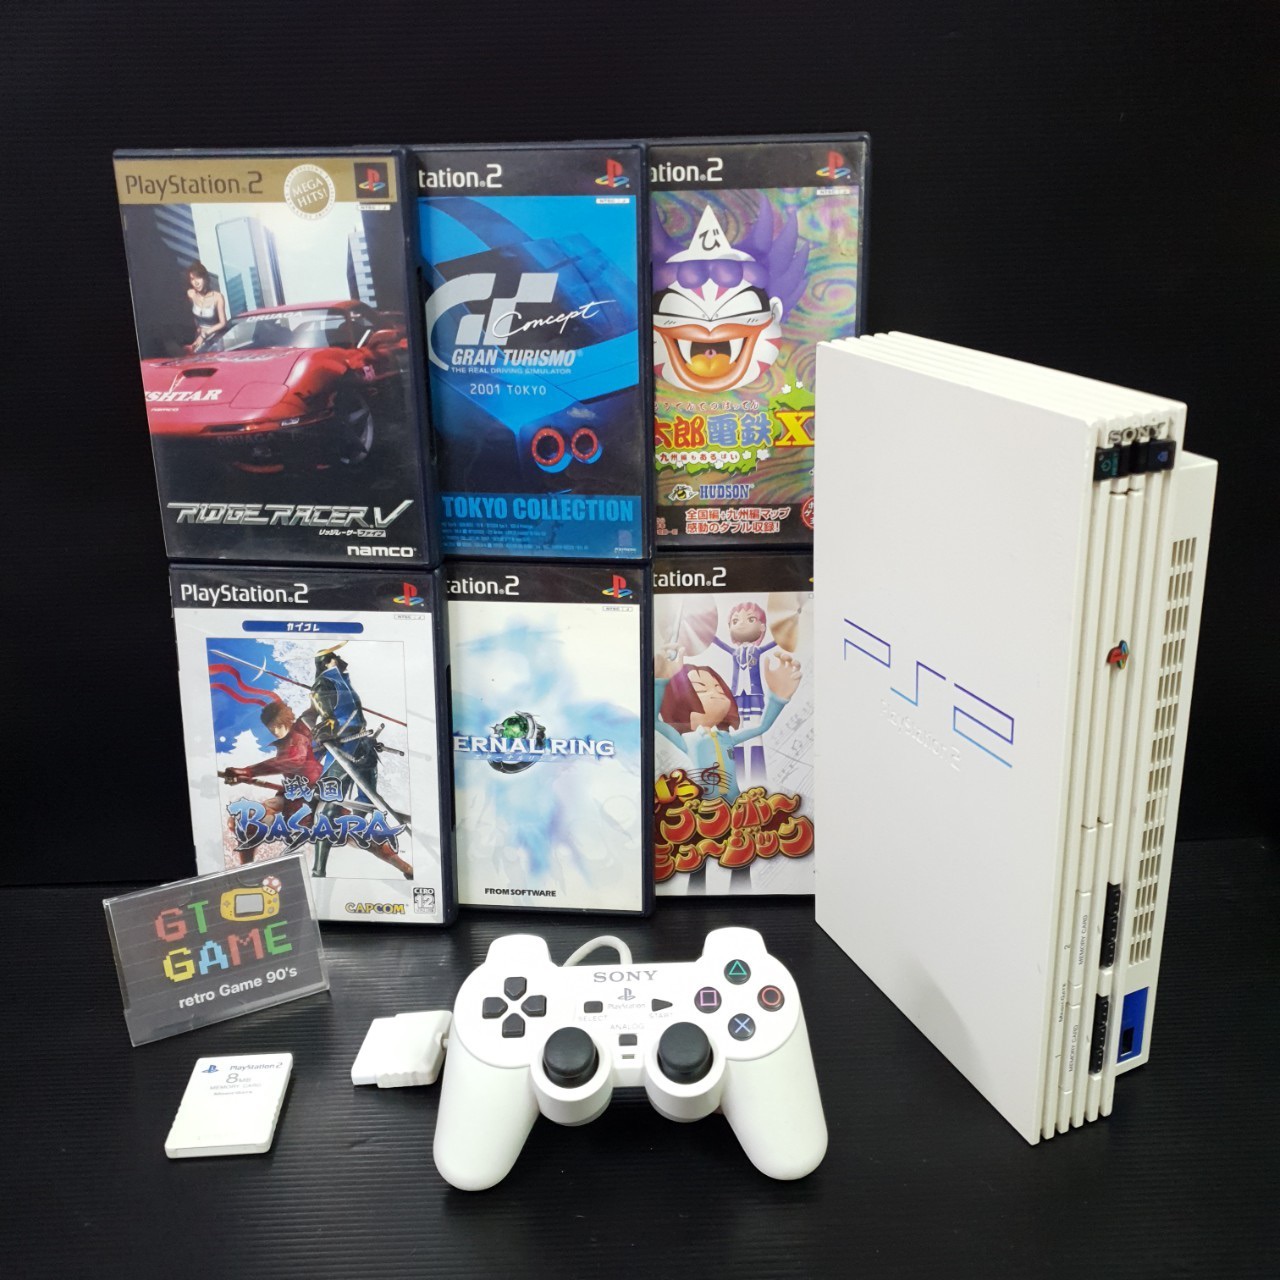 PS2 Limited Edition SCPH-55000 GT🚘 Ceramic White Japan 110v 